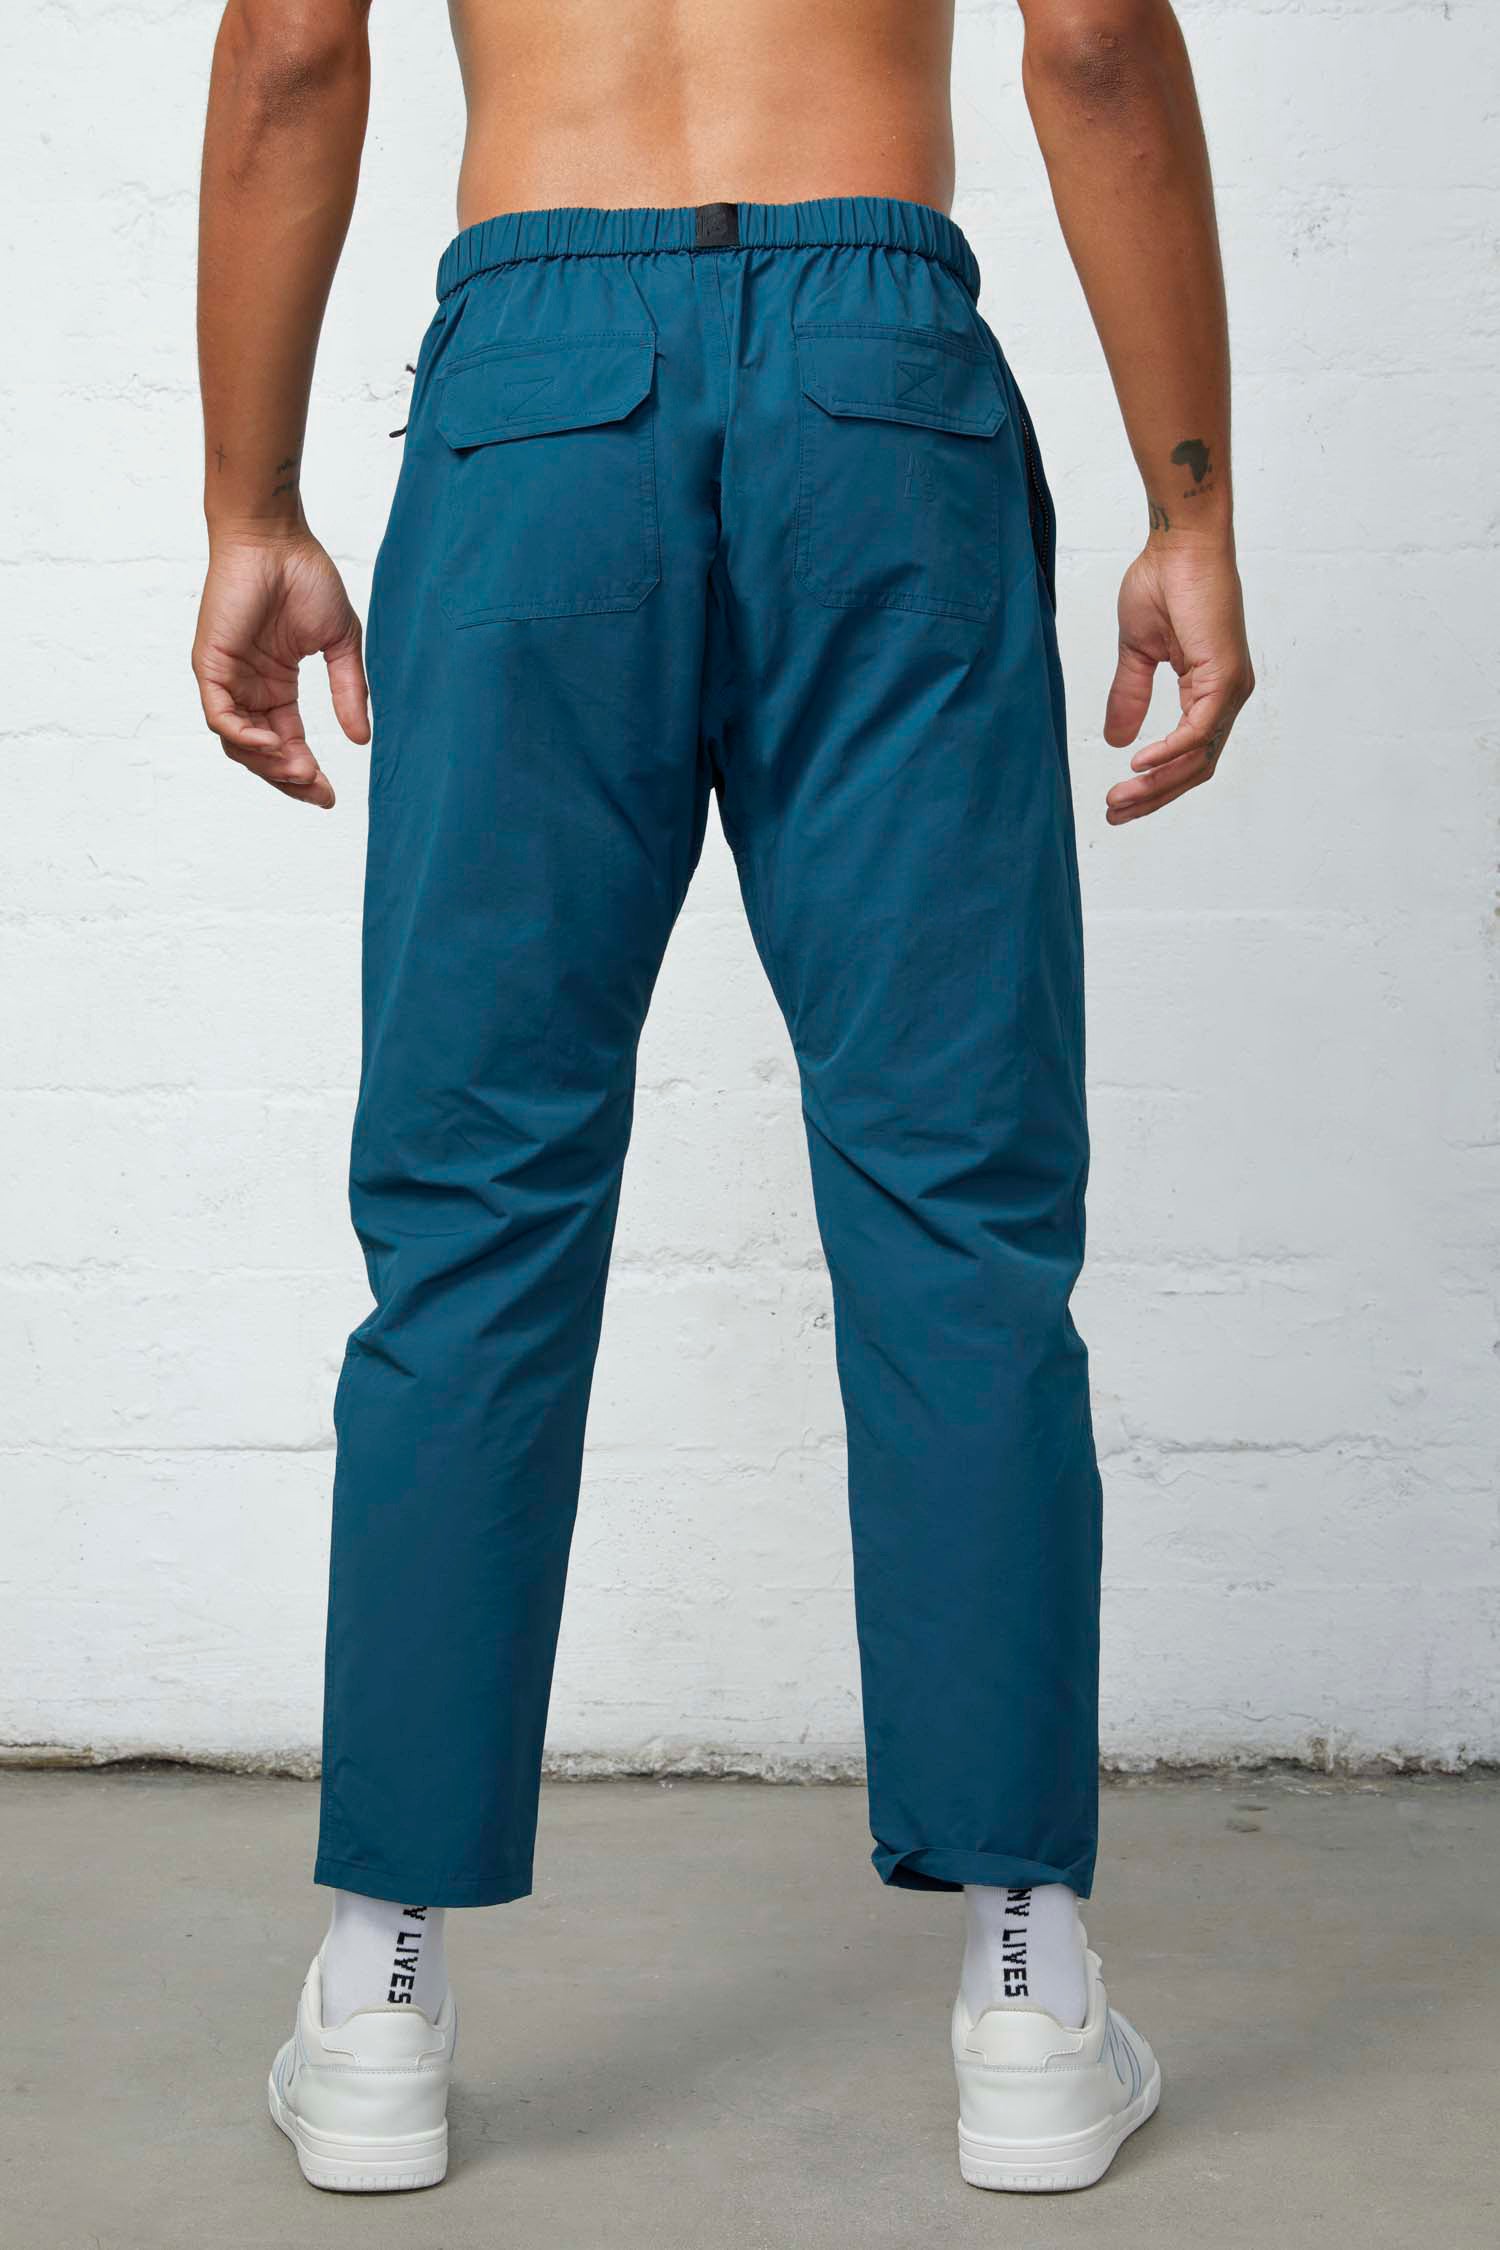 Canis Technical Pants